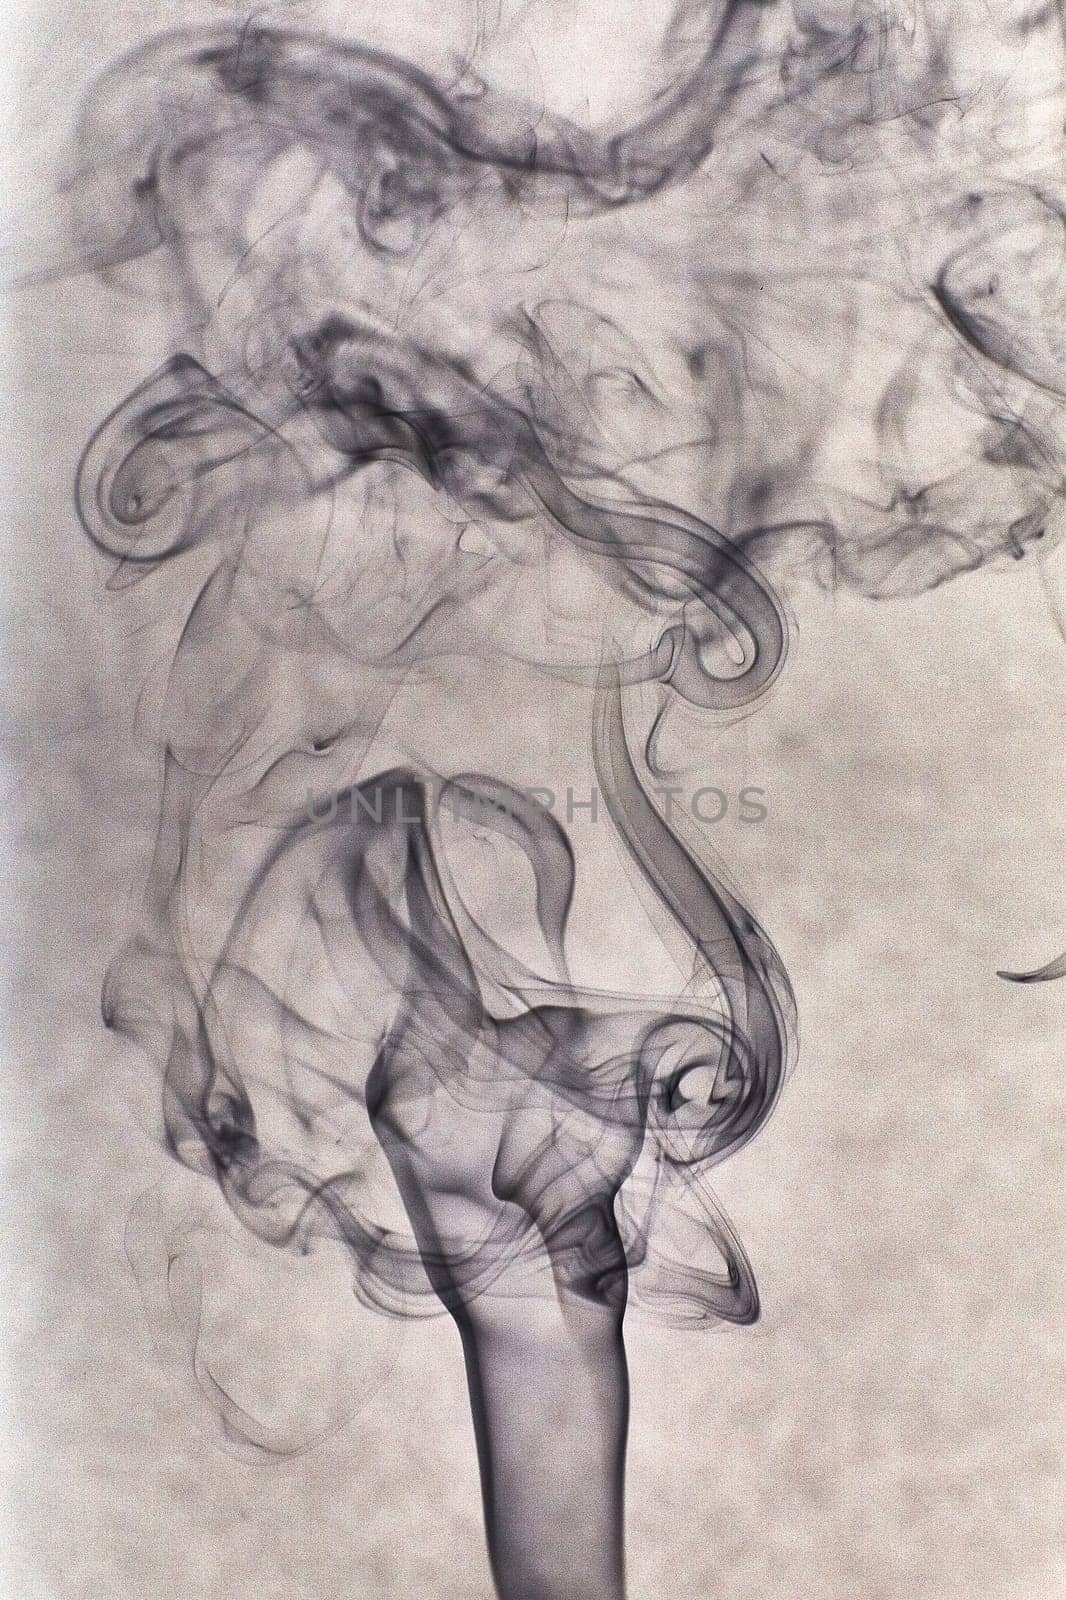 Abstract Incense Smoke Patterns in High-Speed Studio Shot by njproductions